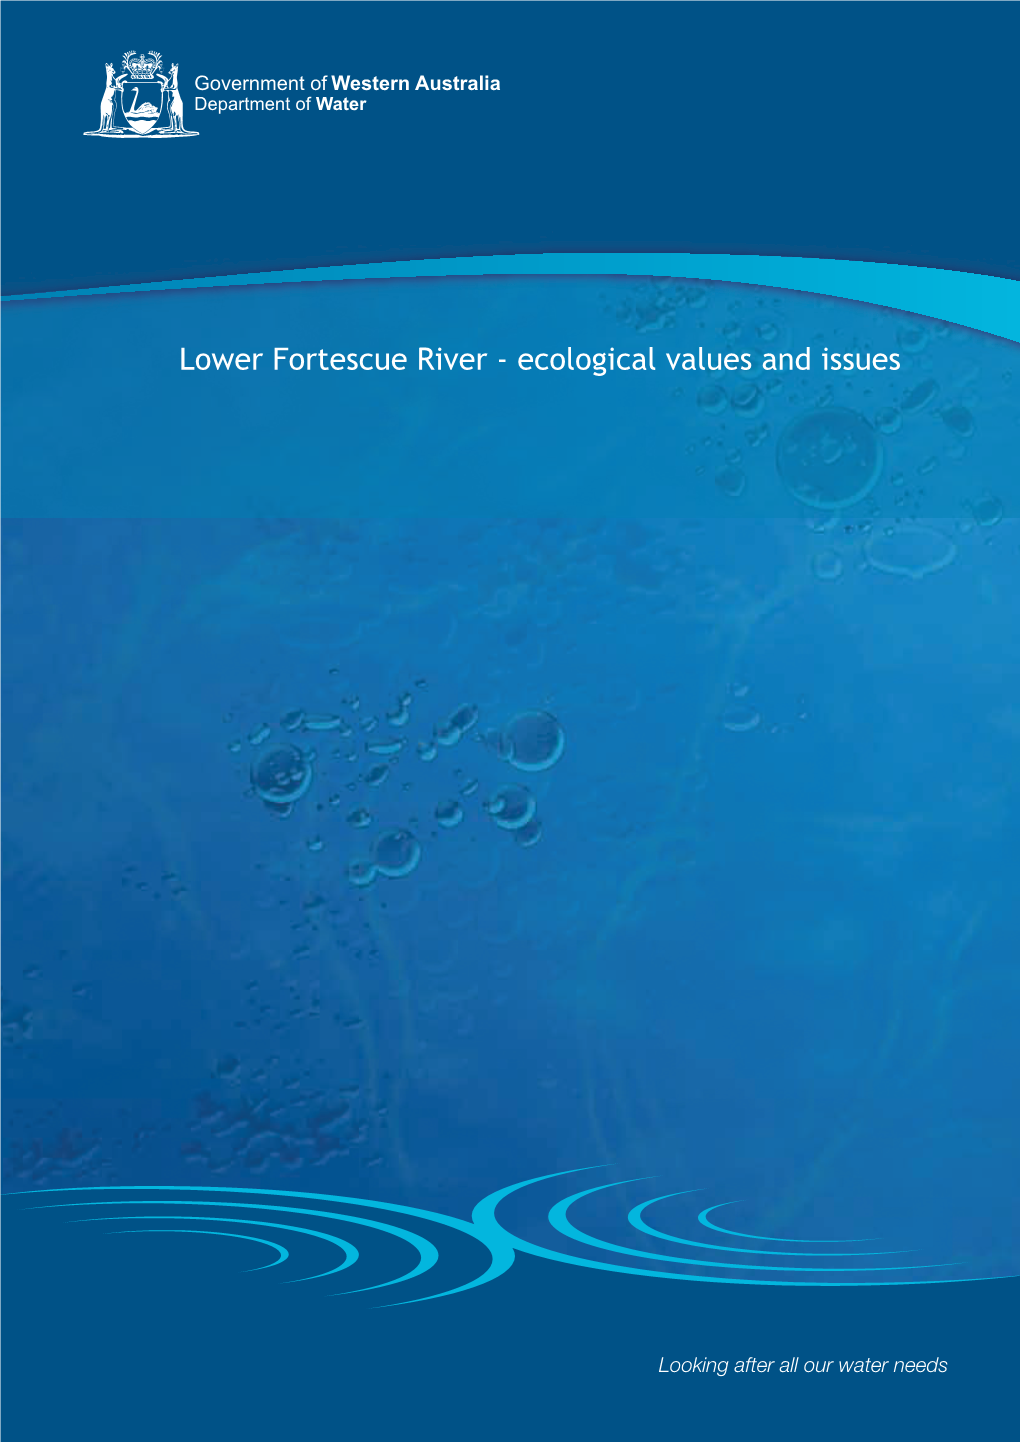 Lower Fortescue River - Ecological Values and Issues